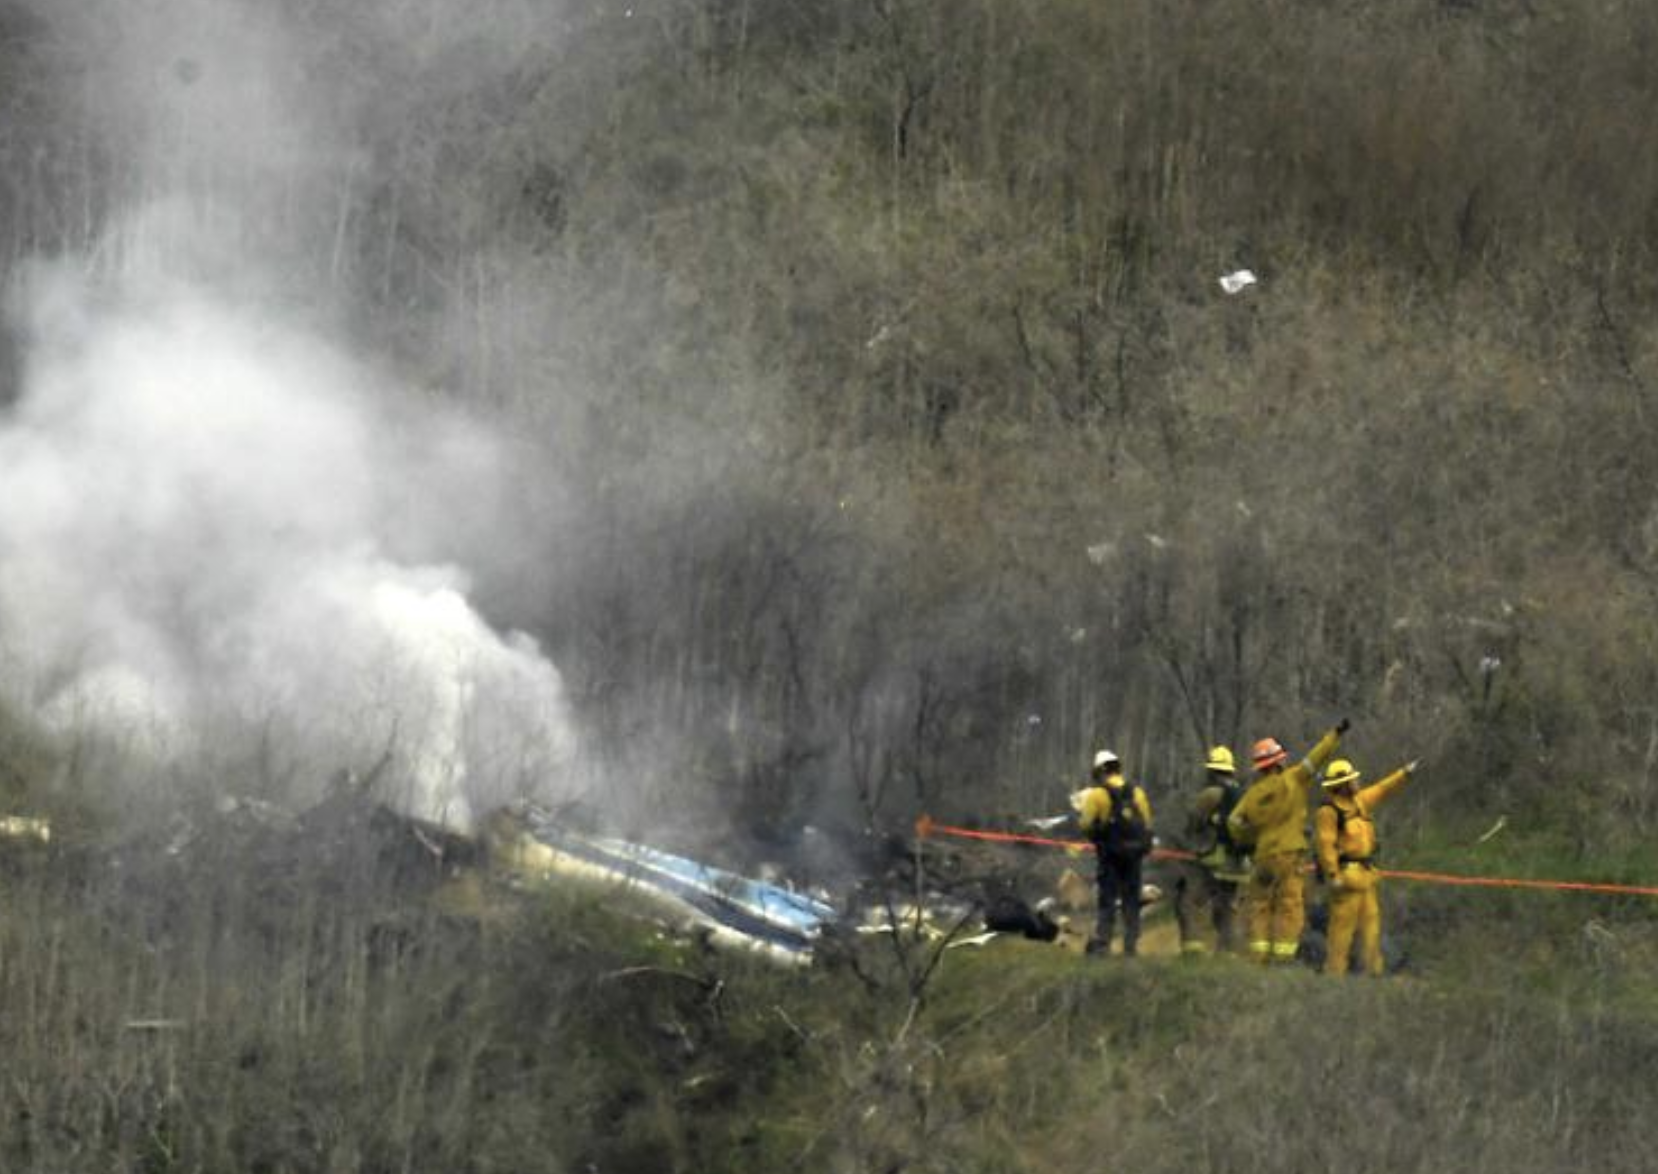 Firefighters work the scene of a helicopter crash where former NBA basketball star Kobe Bryant died